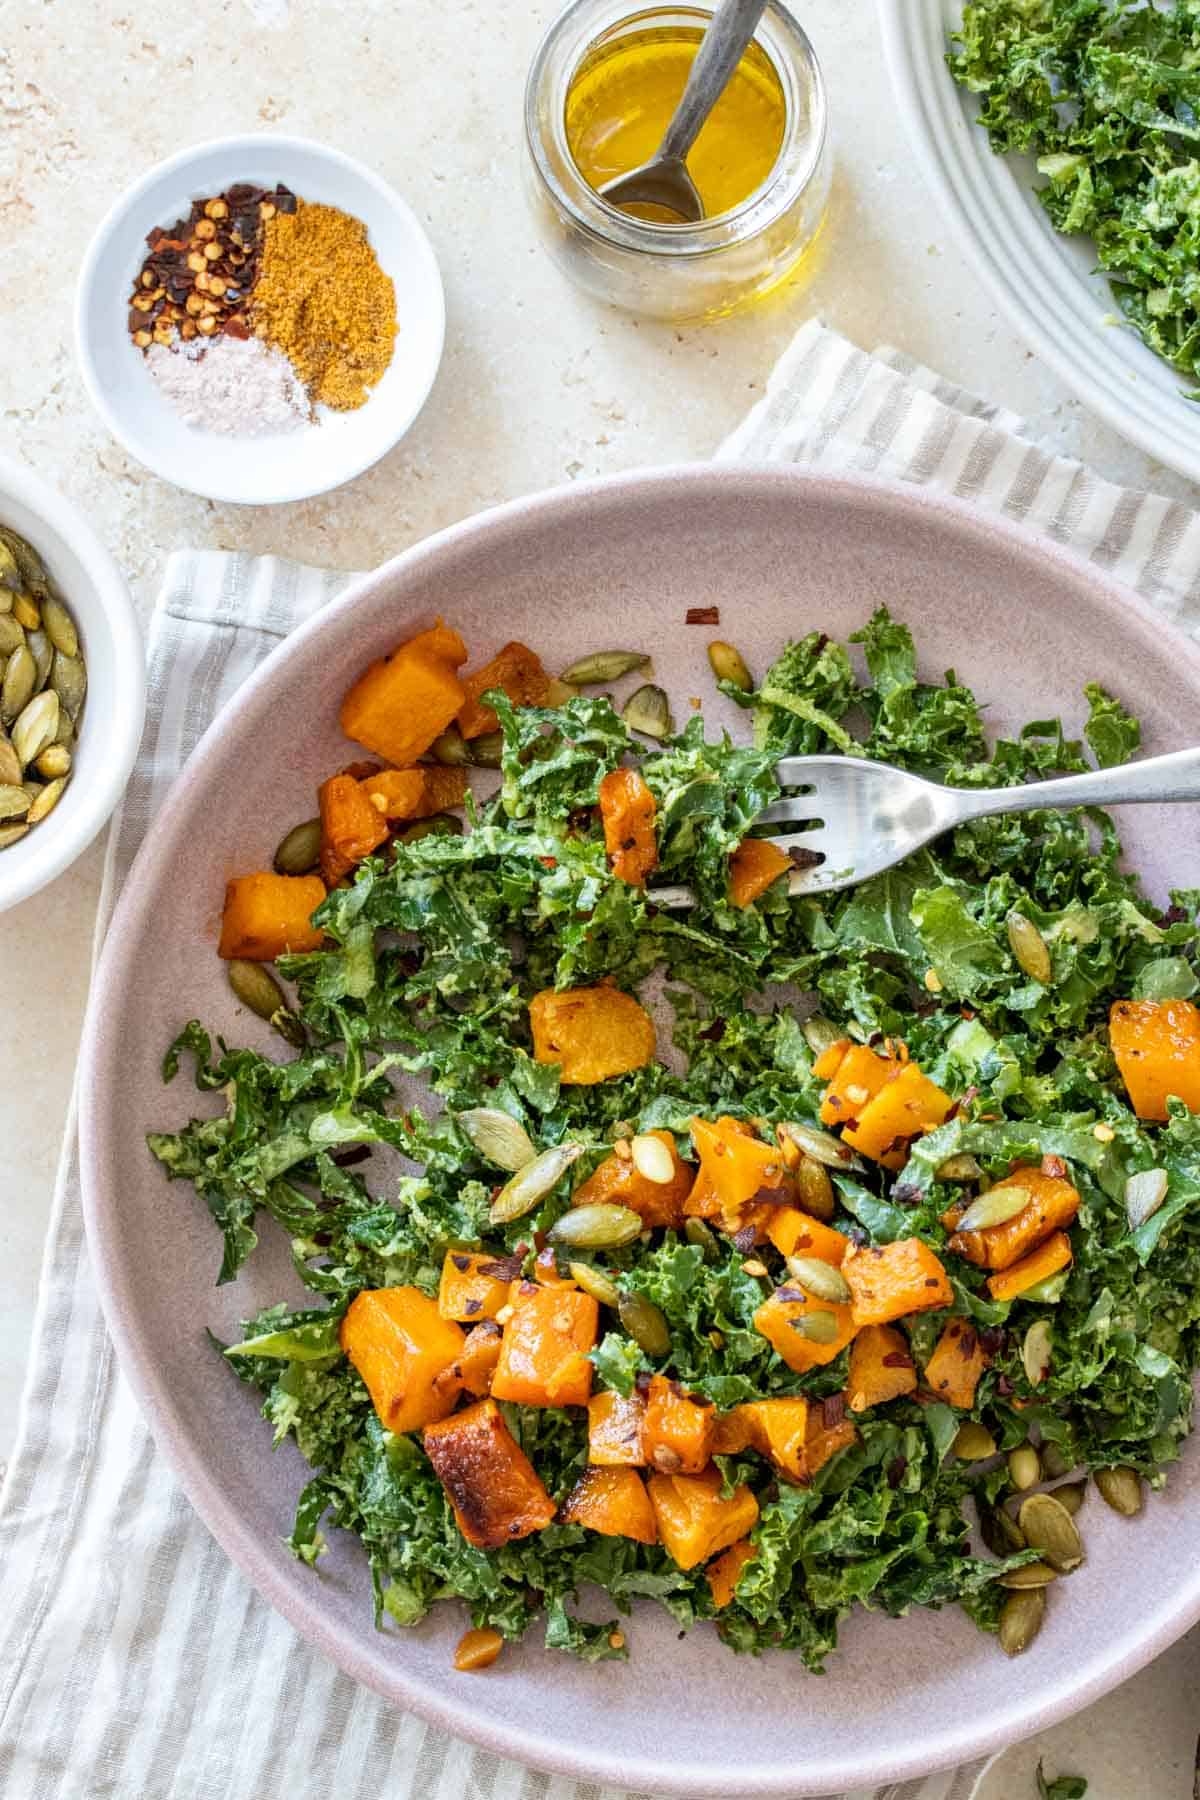 A fork getting a bite of a butternut squash kale salad on a pink plate sitting on a striped towel